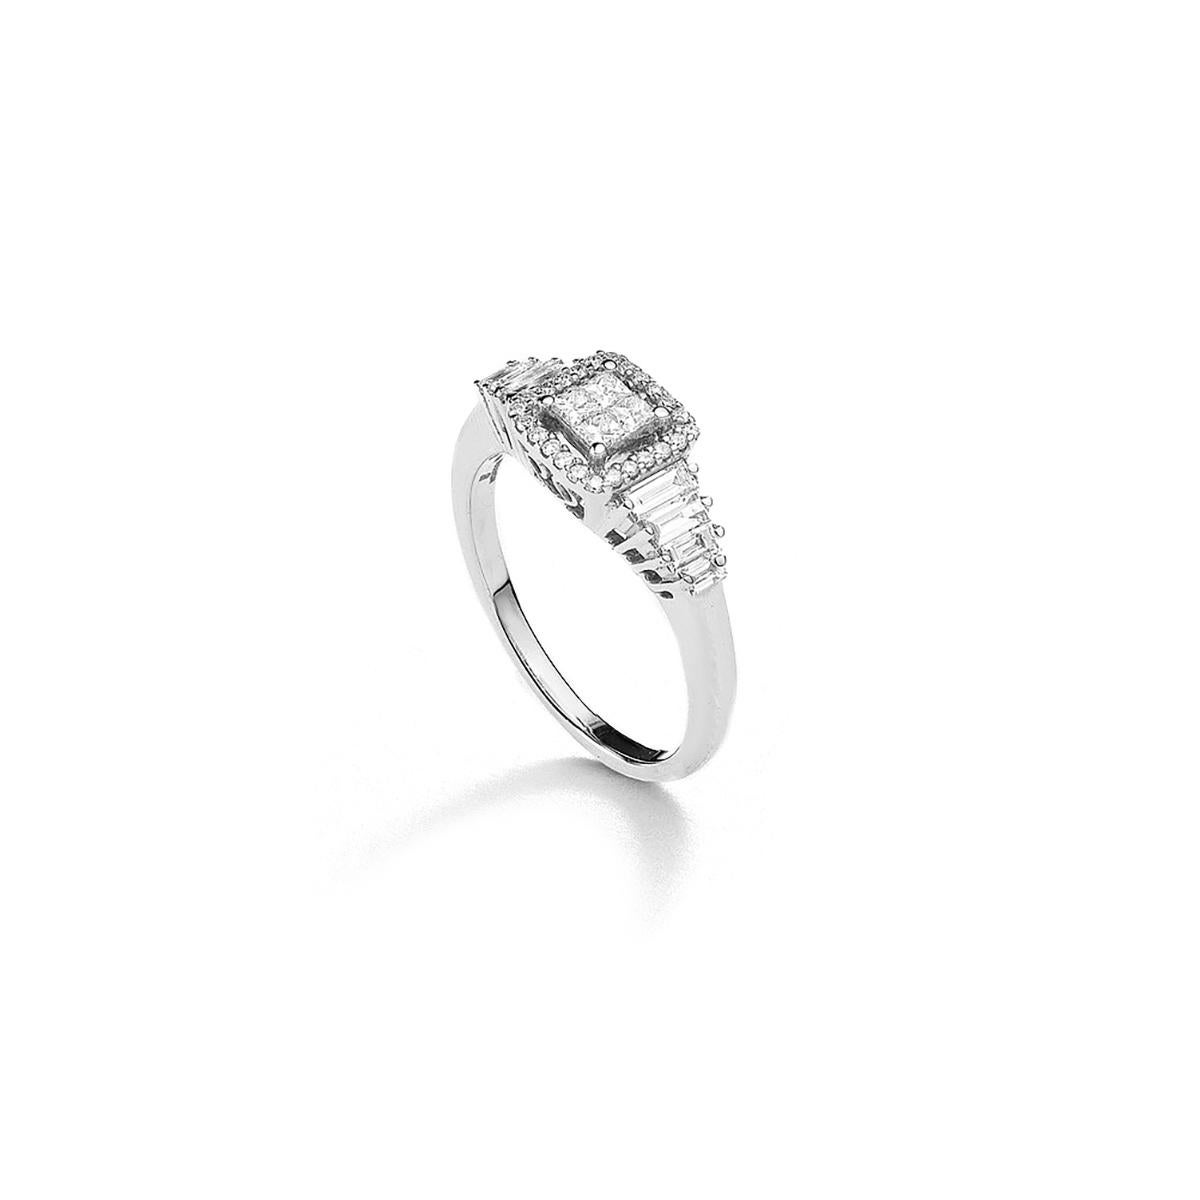 Ring in 18kt white gold set with 12 baguette and princess cut diamonds 0.52 cts and 24 diamonds 0.09 cts Size 53 
Total weight: 4.28 grams